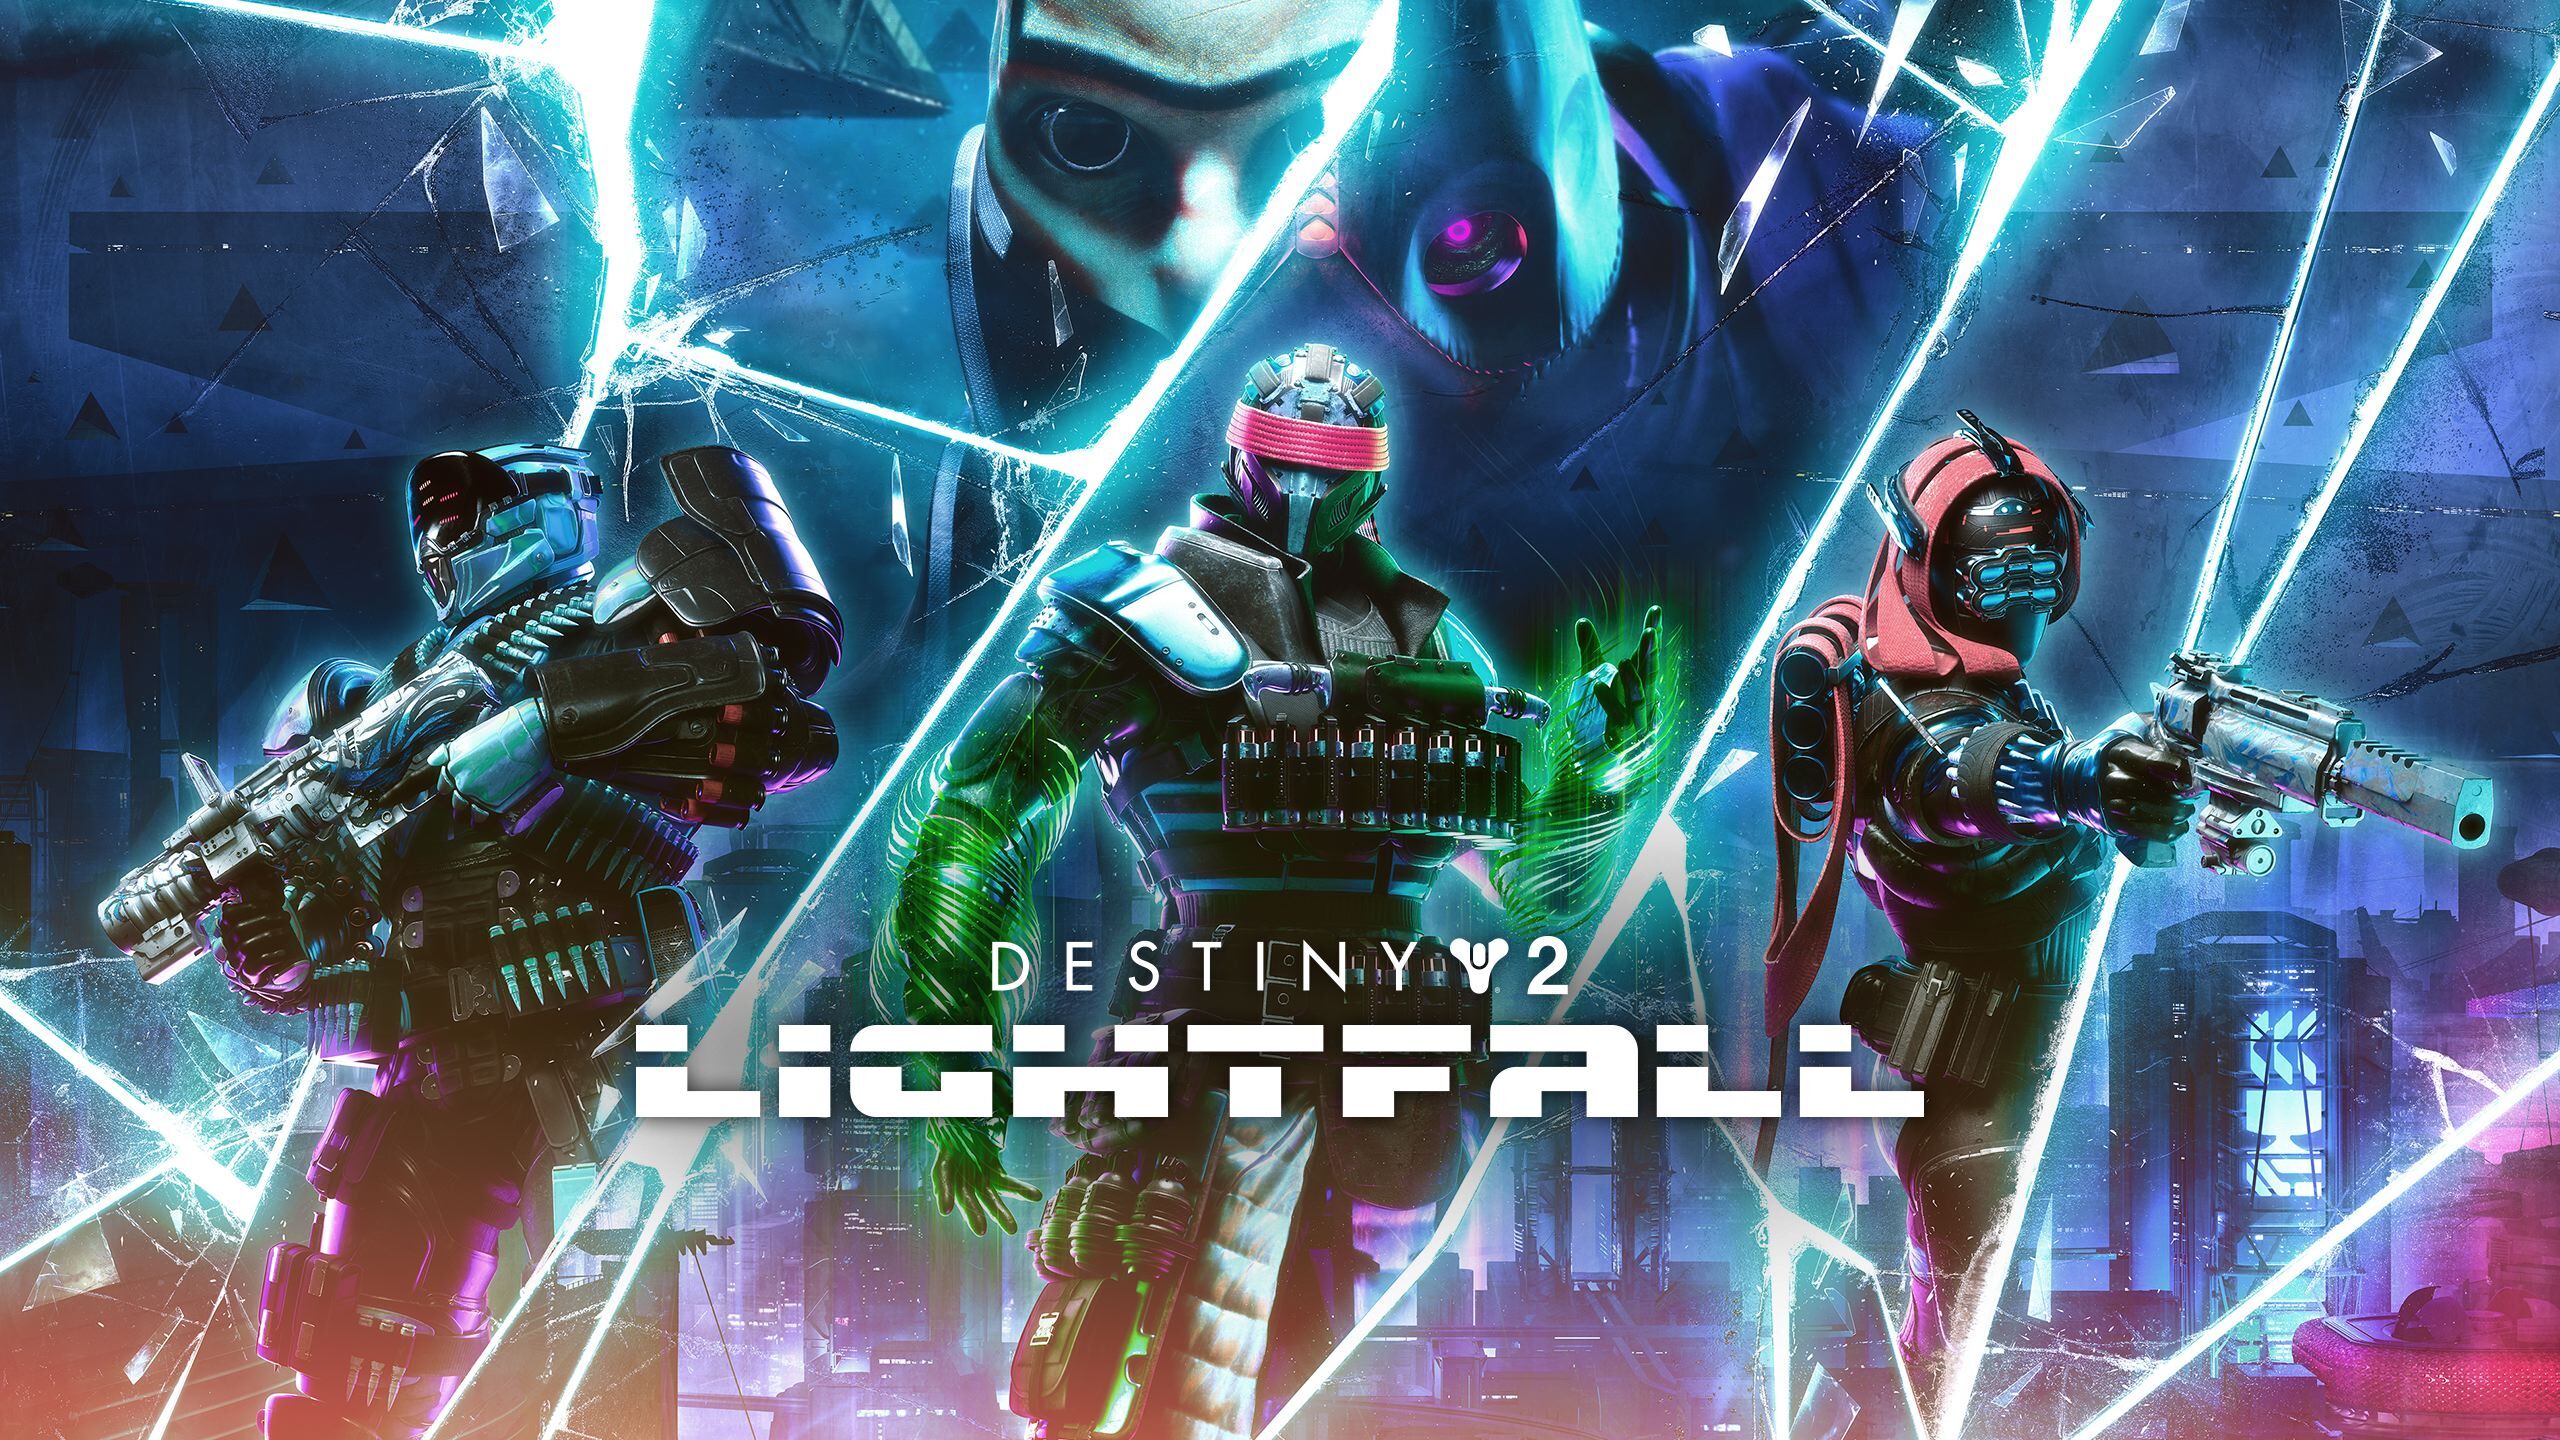 FE - Last game you DIDN'T finish and your thoughts - Page 36 EGS_Destiny2Lightfall_Bungie_AddOn_S1_2560x1440-d8b7472c54040d10d8710f5a269a5437